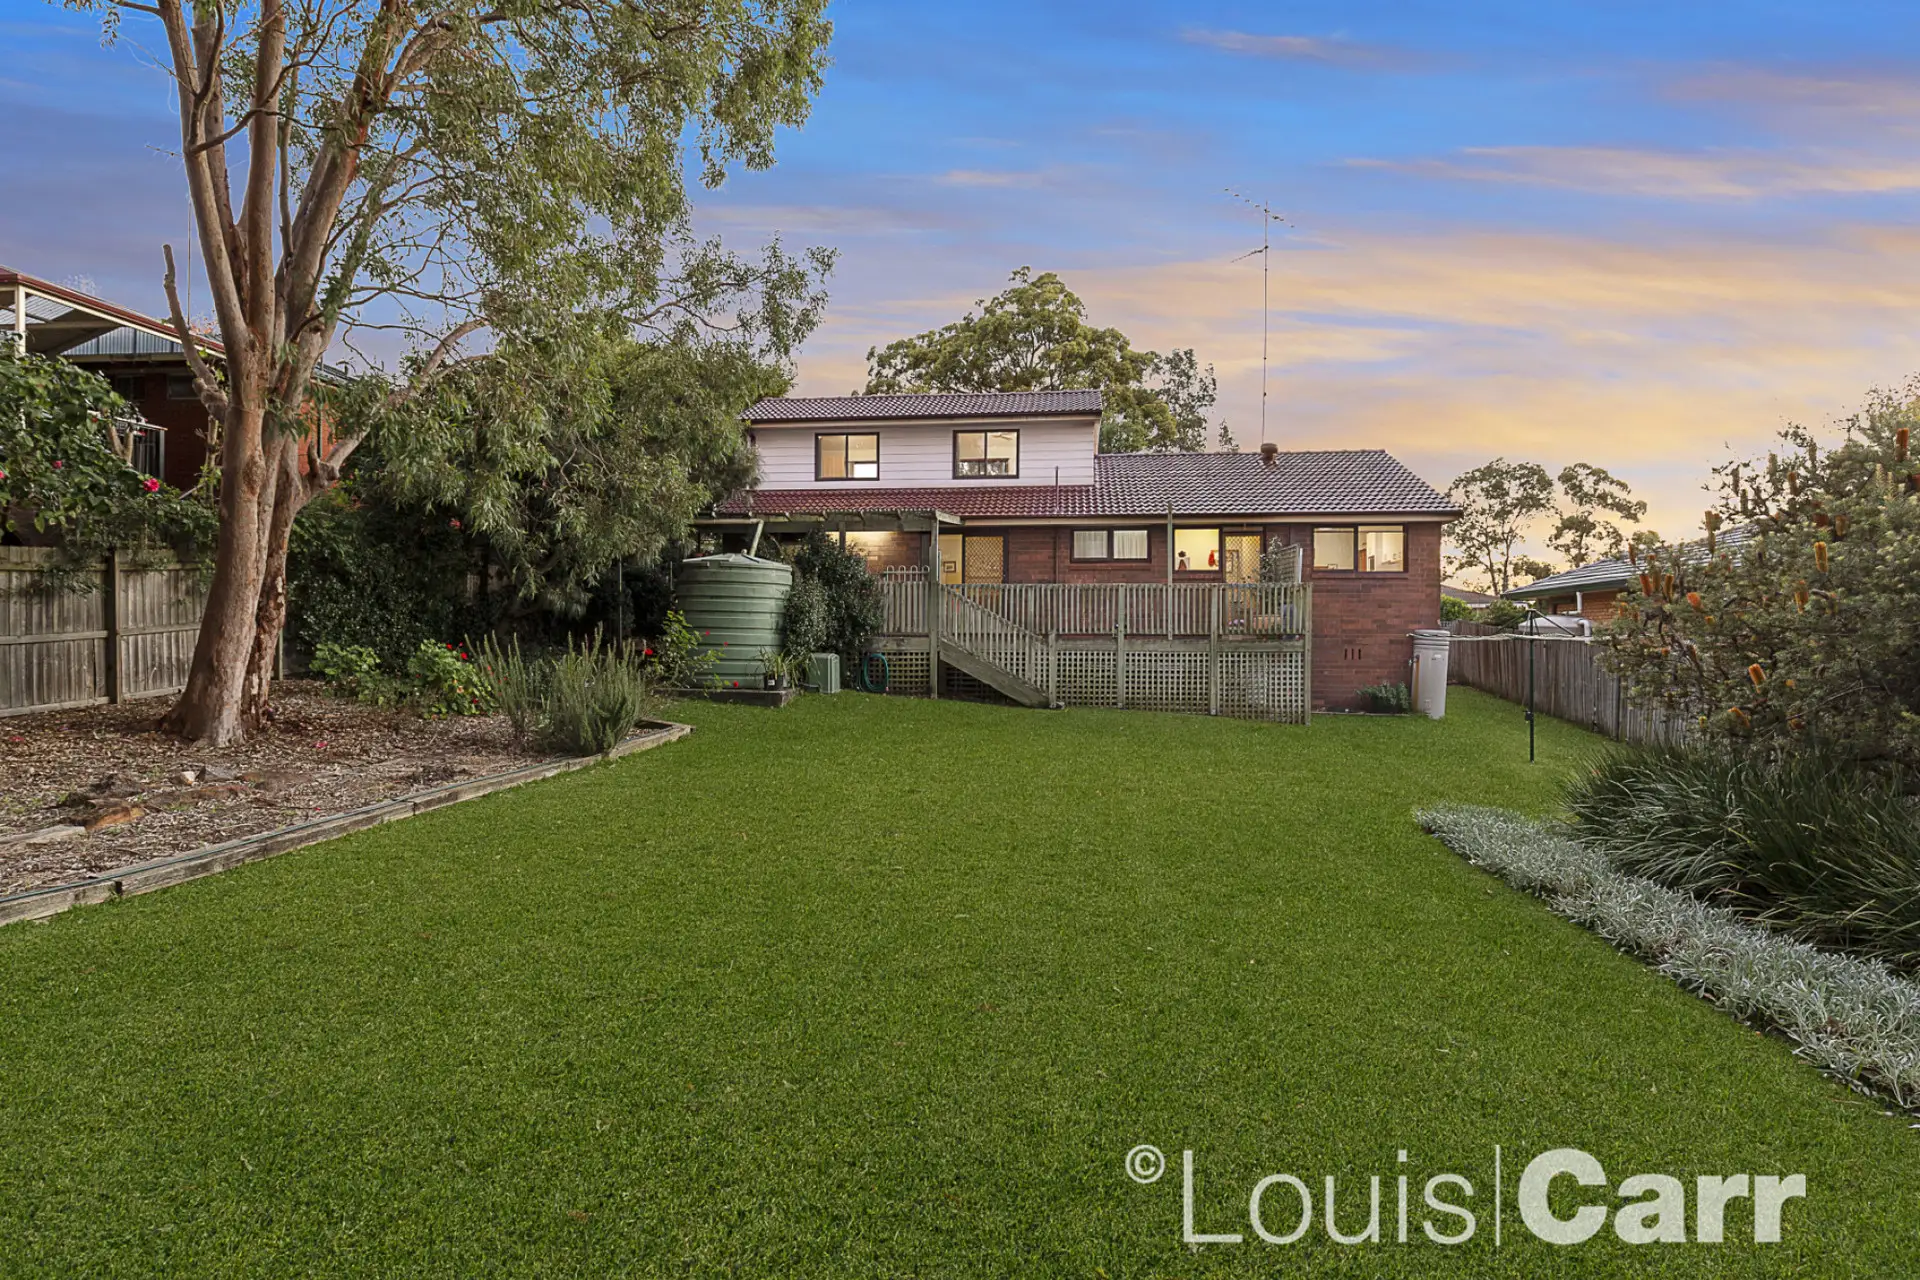 Photo #2: 13 Benwerrin Avenue, Baulkham Hills - Sold by Louis Carr Real Estate